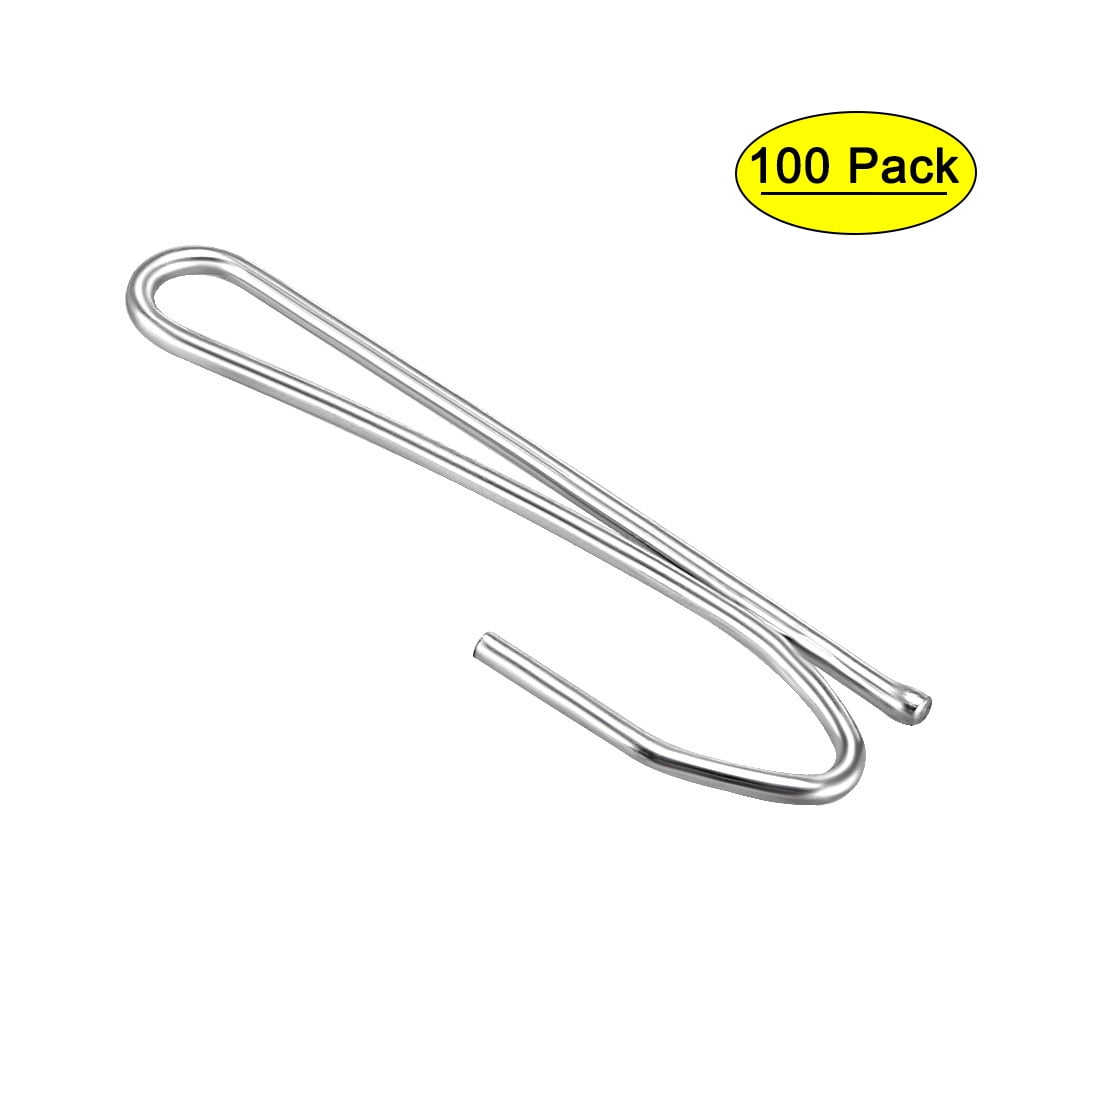 New Metal Silver Curtain Hooks For Pleated Tape Sewing UK Seller 